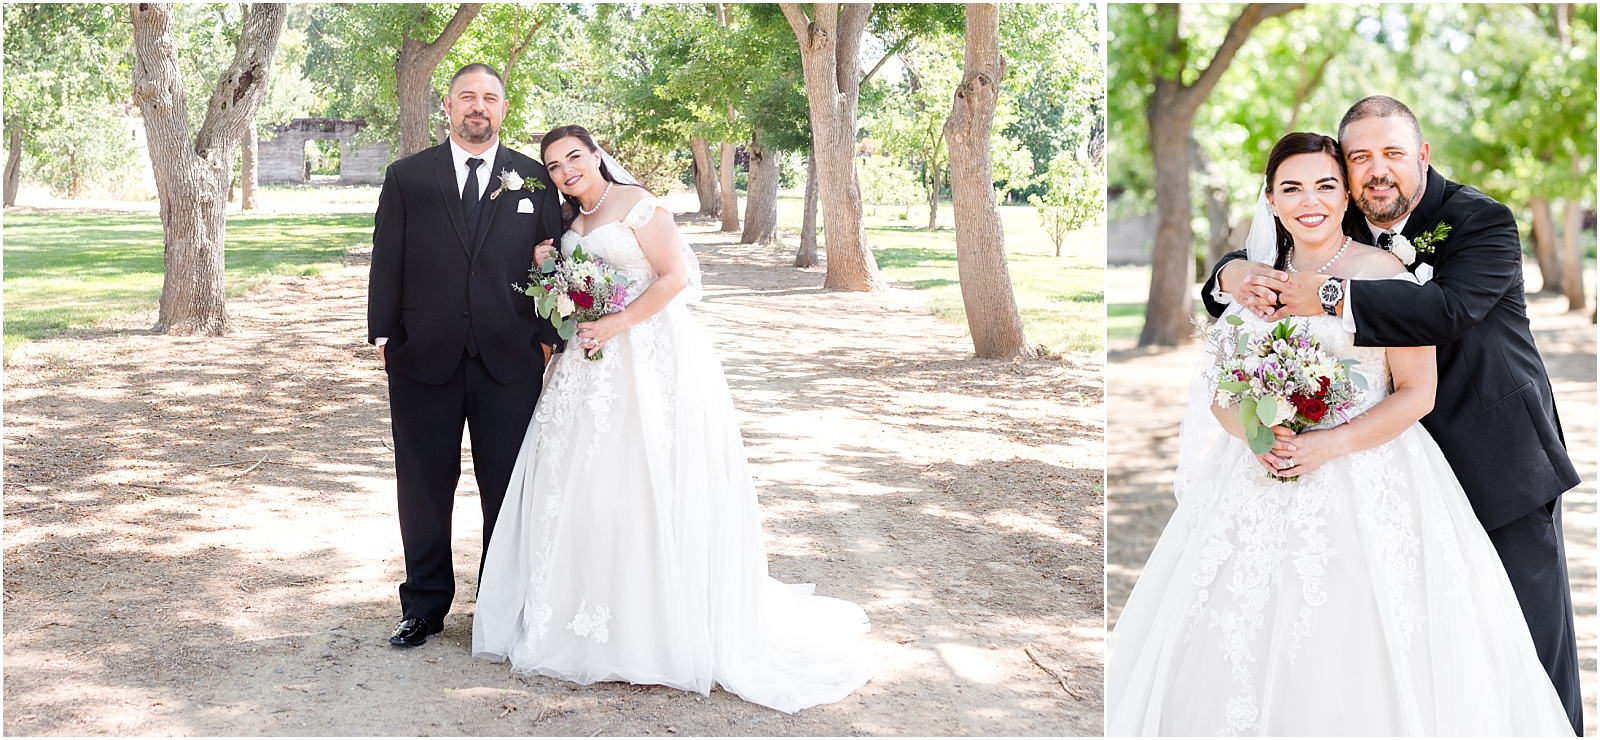 Ravenswood Historic Site wedding day portraits - bride and groom under tree path.